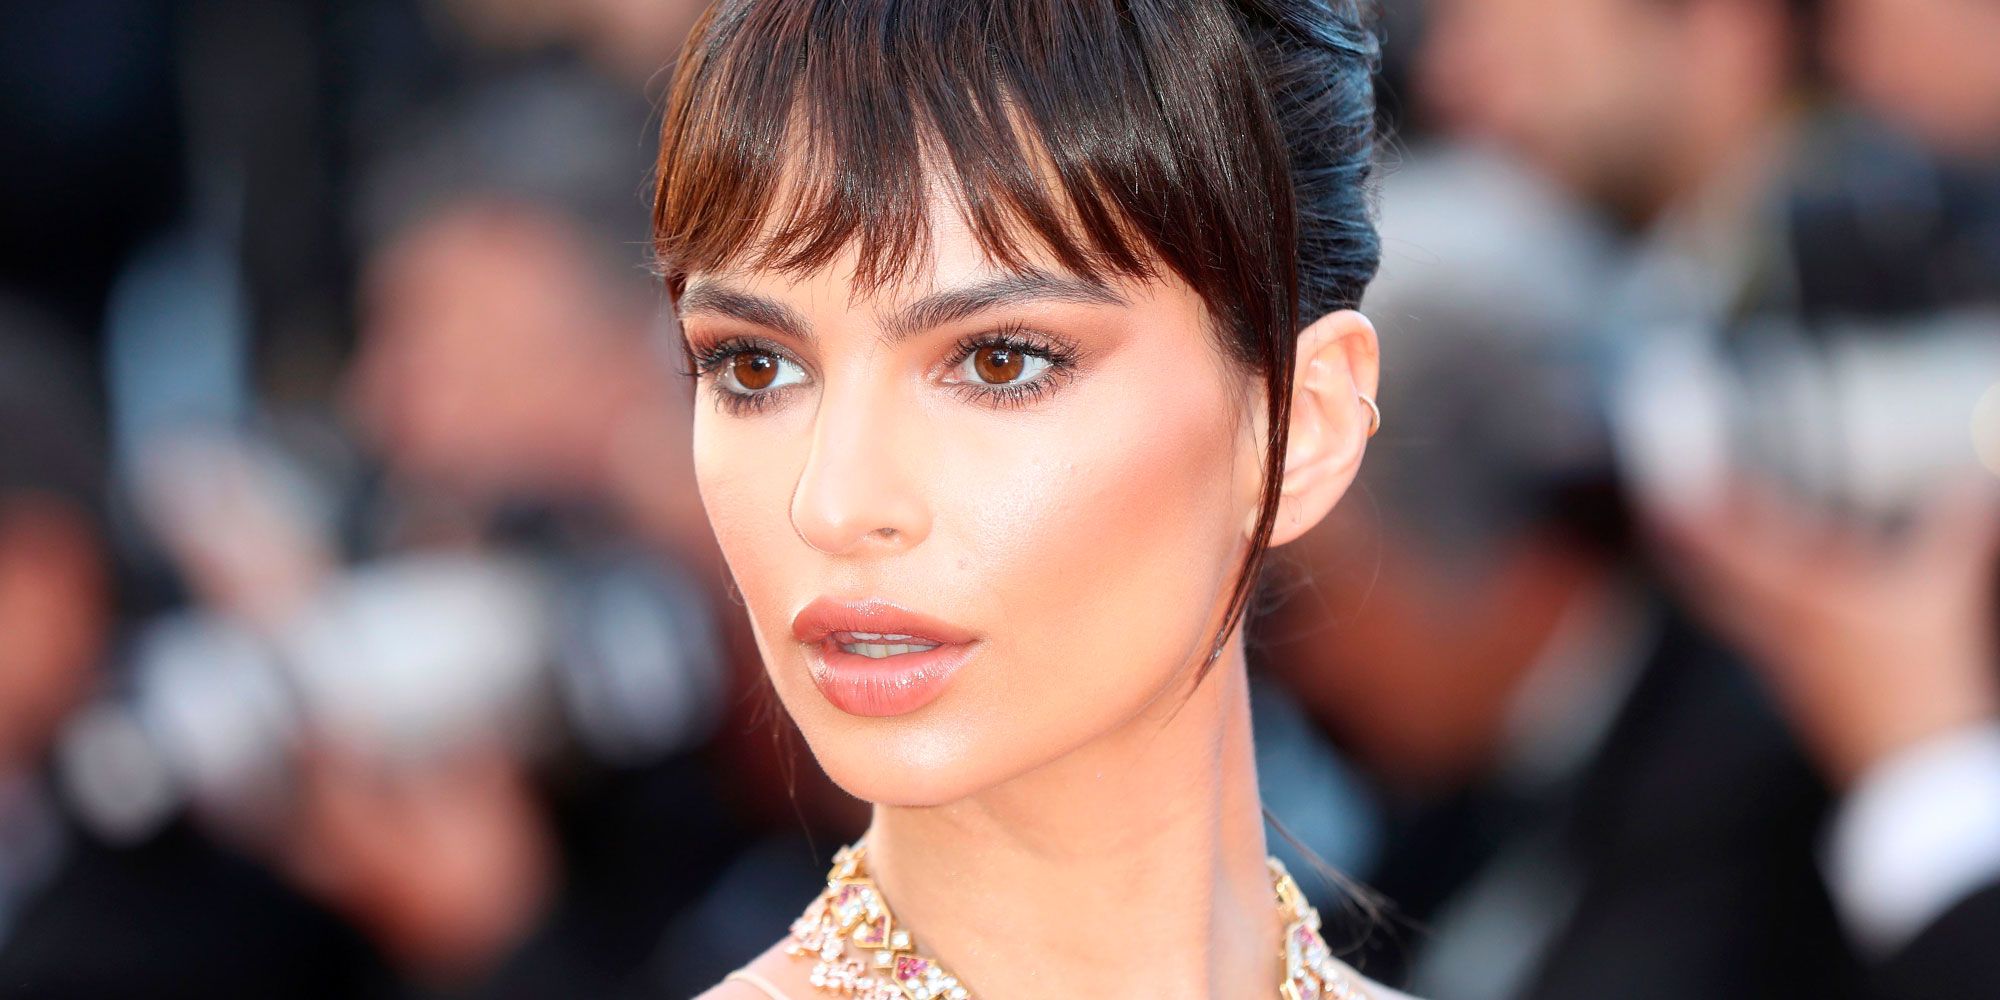 22 Awesome Hairstyles With SideSwept Bangs For Women